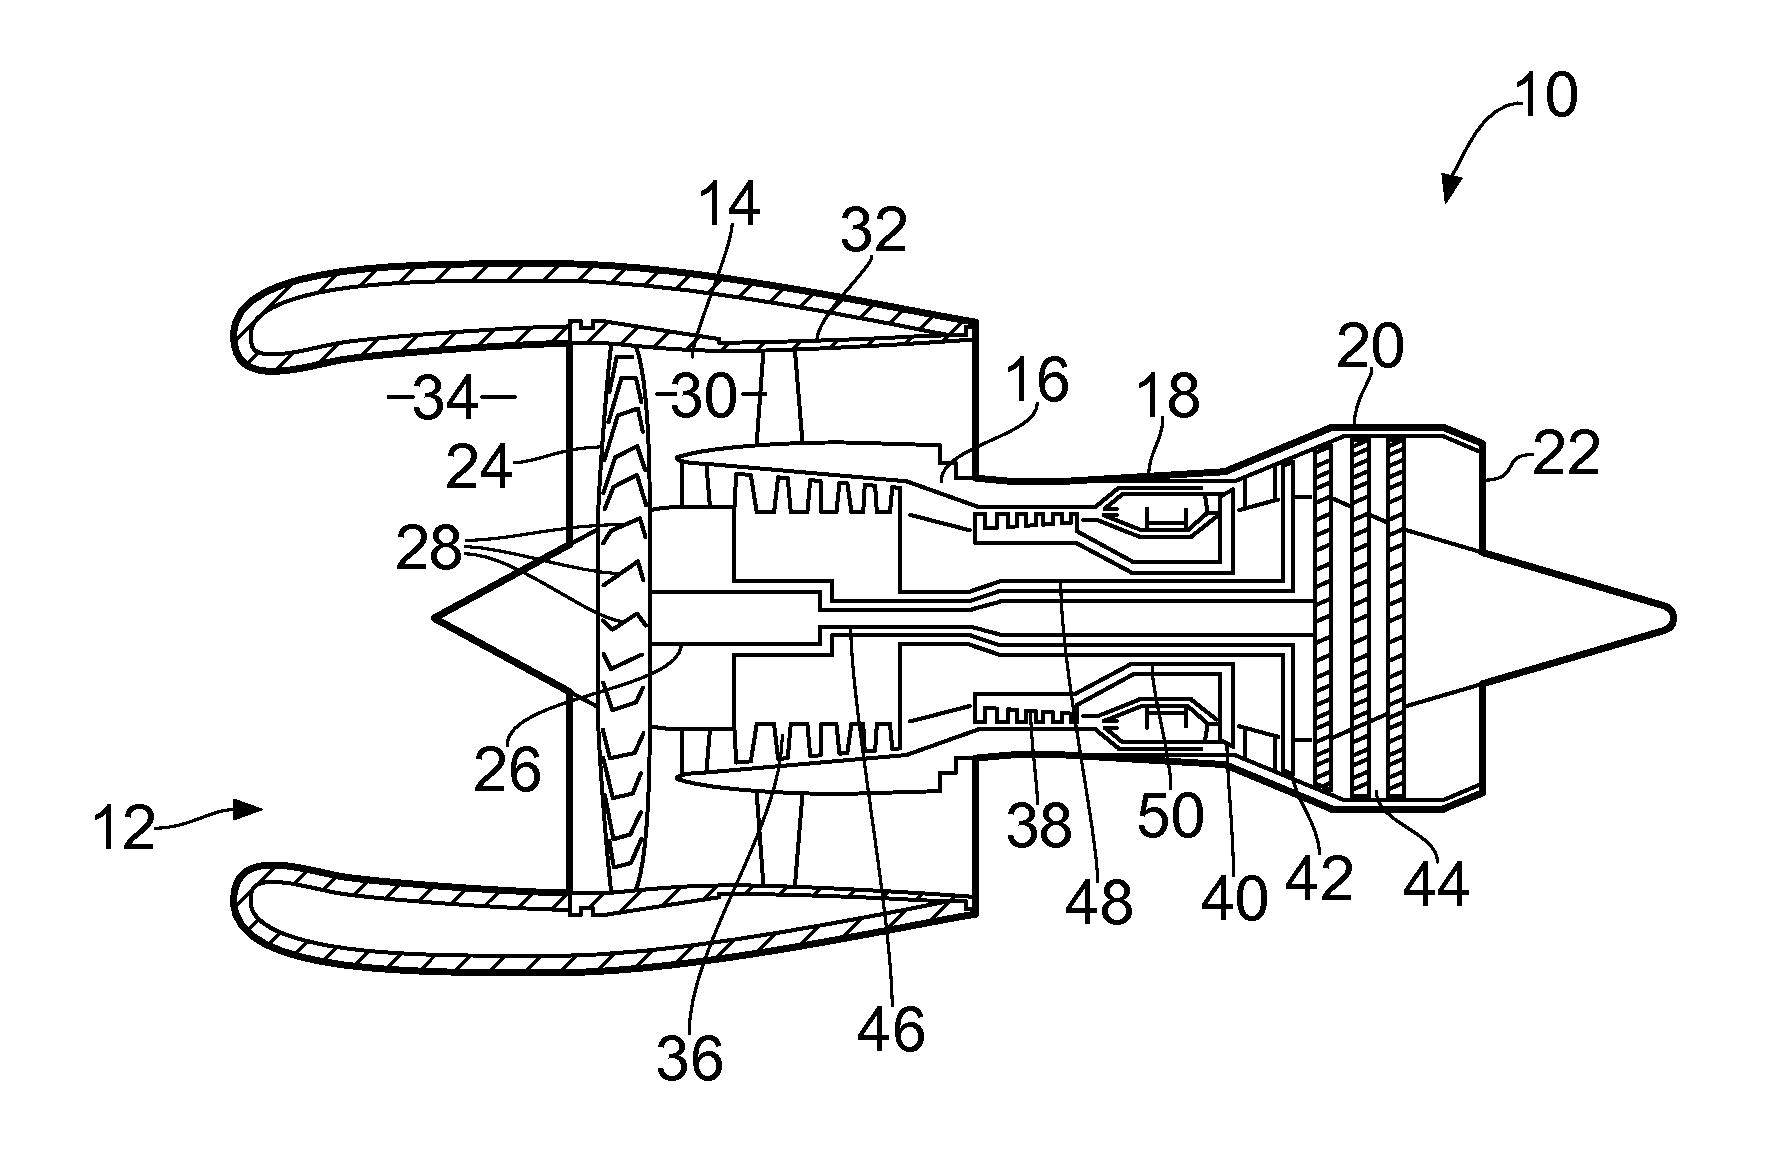 Intake duct liner for a turbofan gas turbine engine